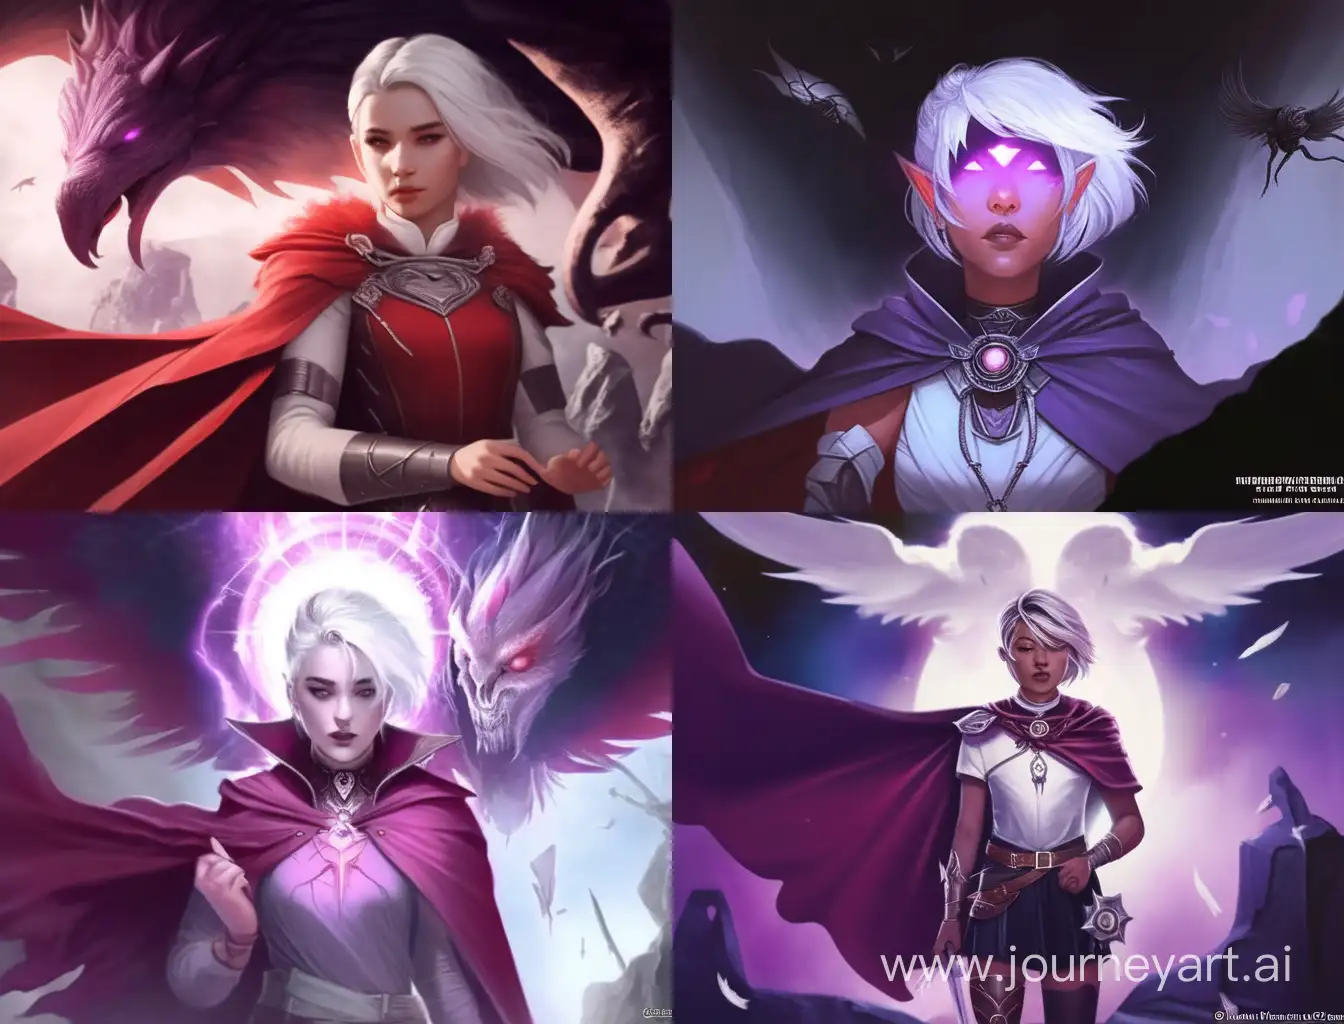 1970's dark fantasy book cover paper art dungeons and dragons style drawing of woman, black eyes, short white hair with long front strands, thin build, plump black lips, lilac wings, red halo, black top and shorts, burgundy cape, white skin, silver jewelry with minimalist far perspective